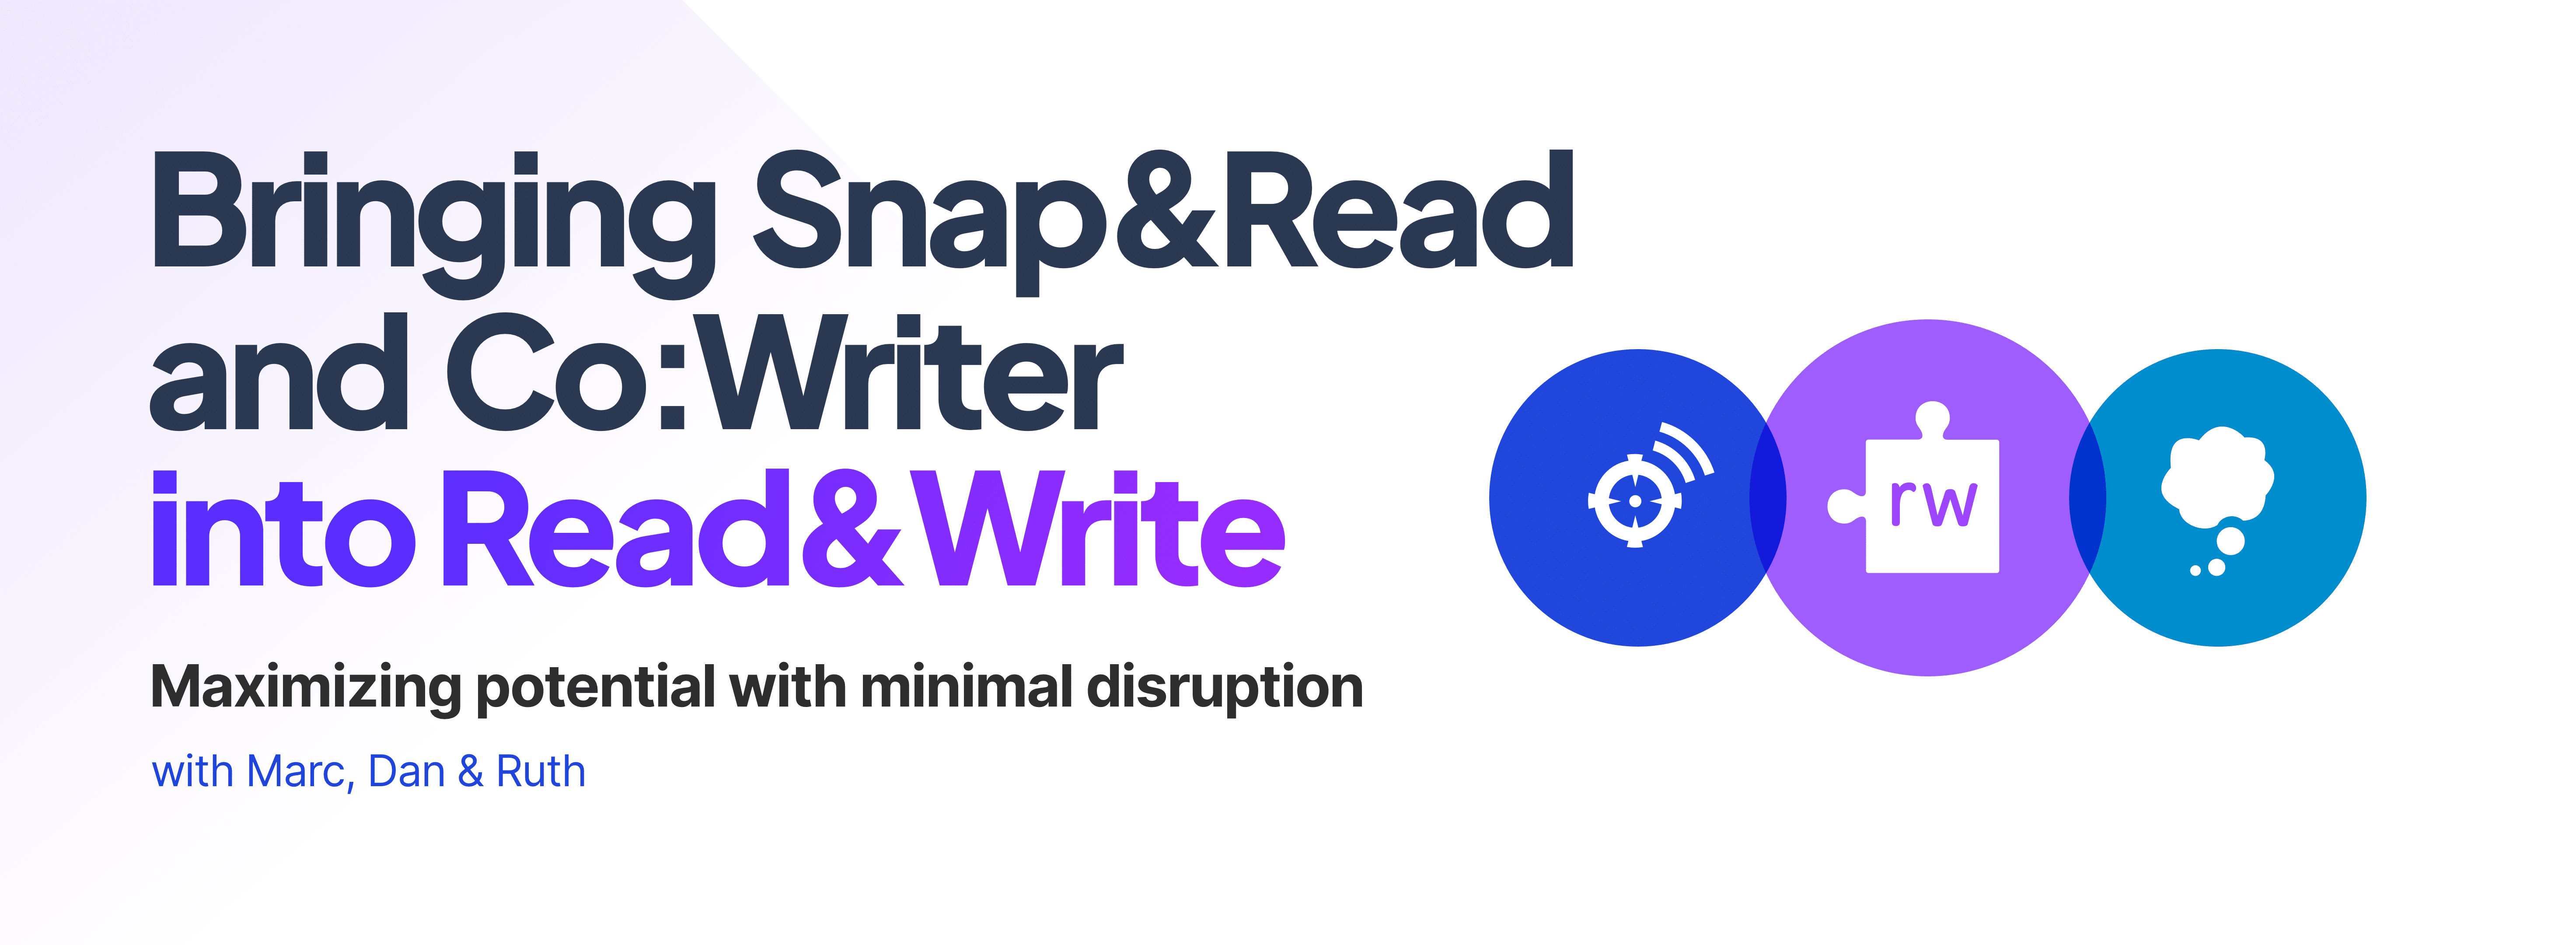 Bringing Snap&Read and Co:Writer into Read&Write: Maximizing potential with minimal disruption webinar